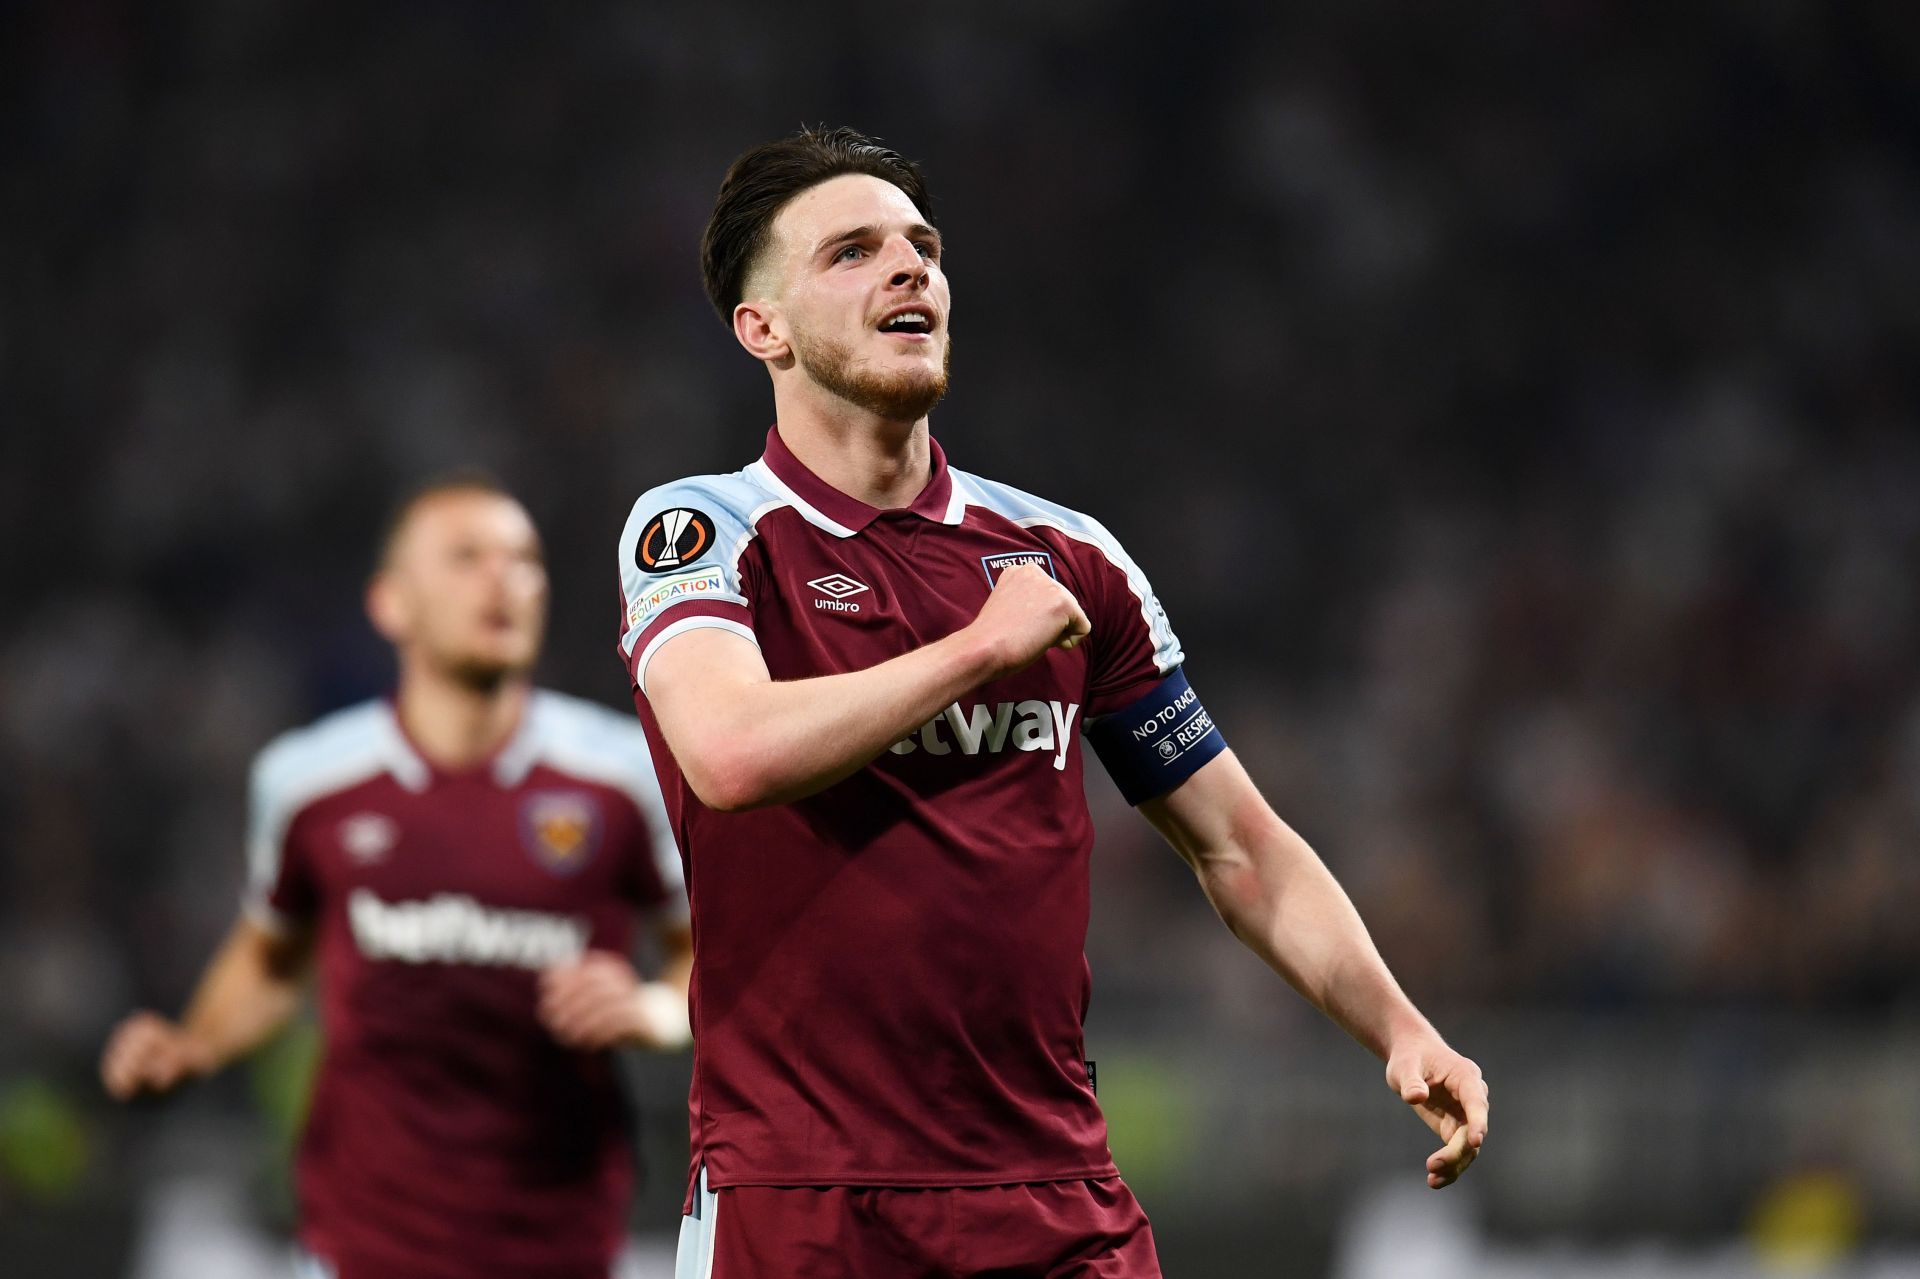 Declan Rice has a bright future ahead of him and is likely to get a lucrative transfer offer in the coming years